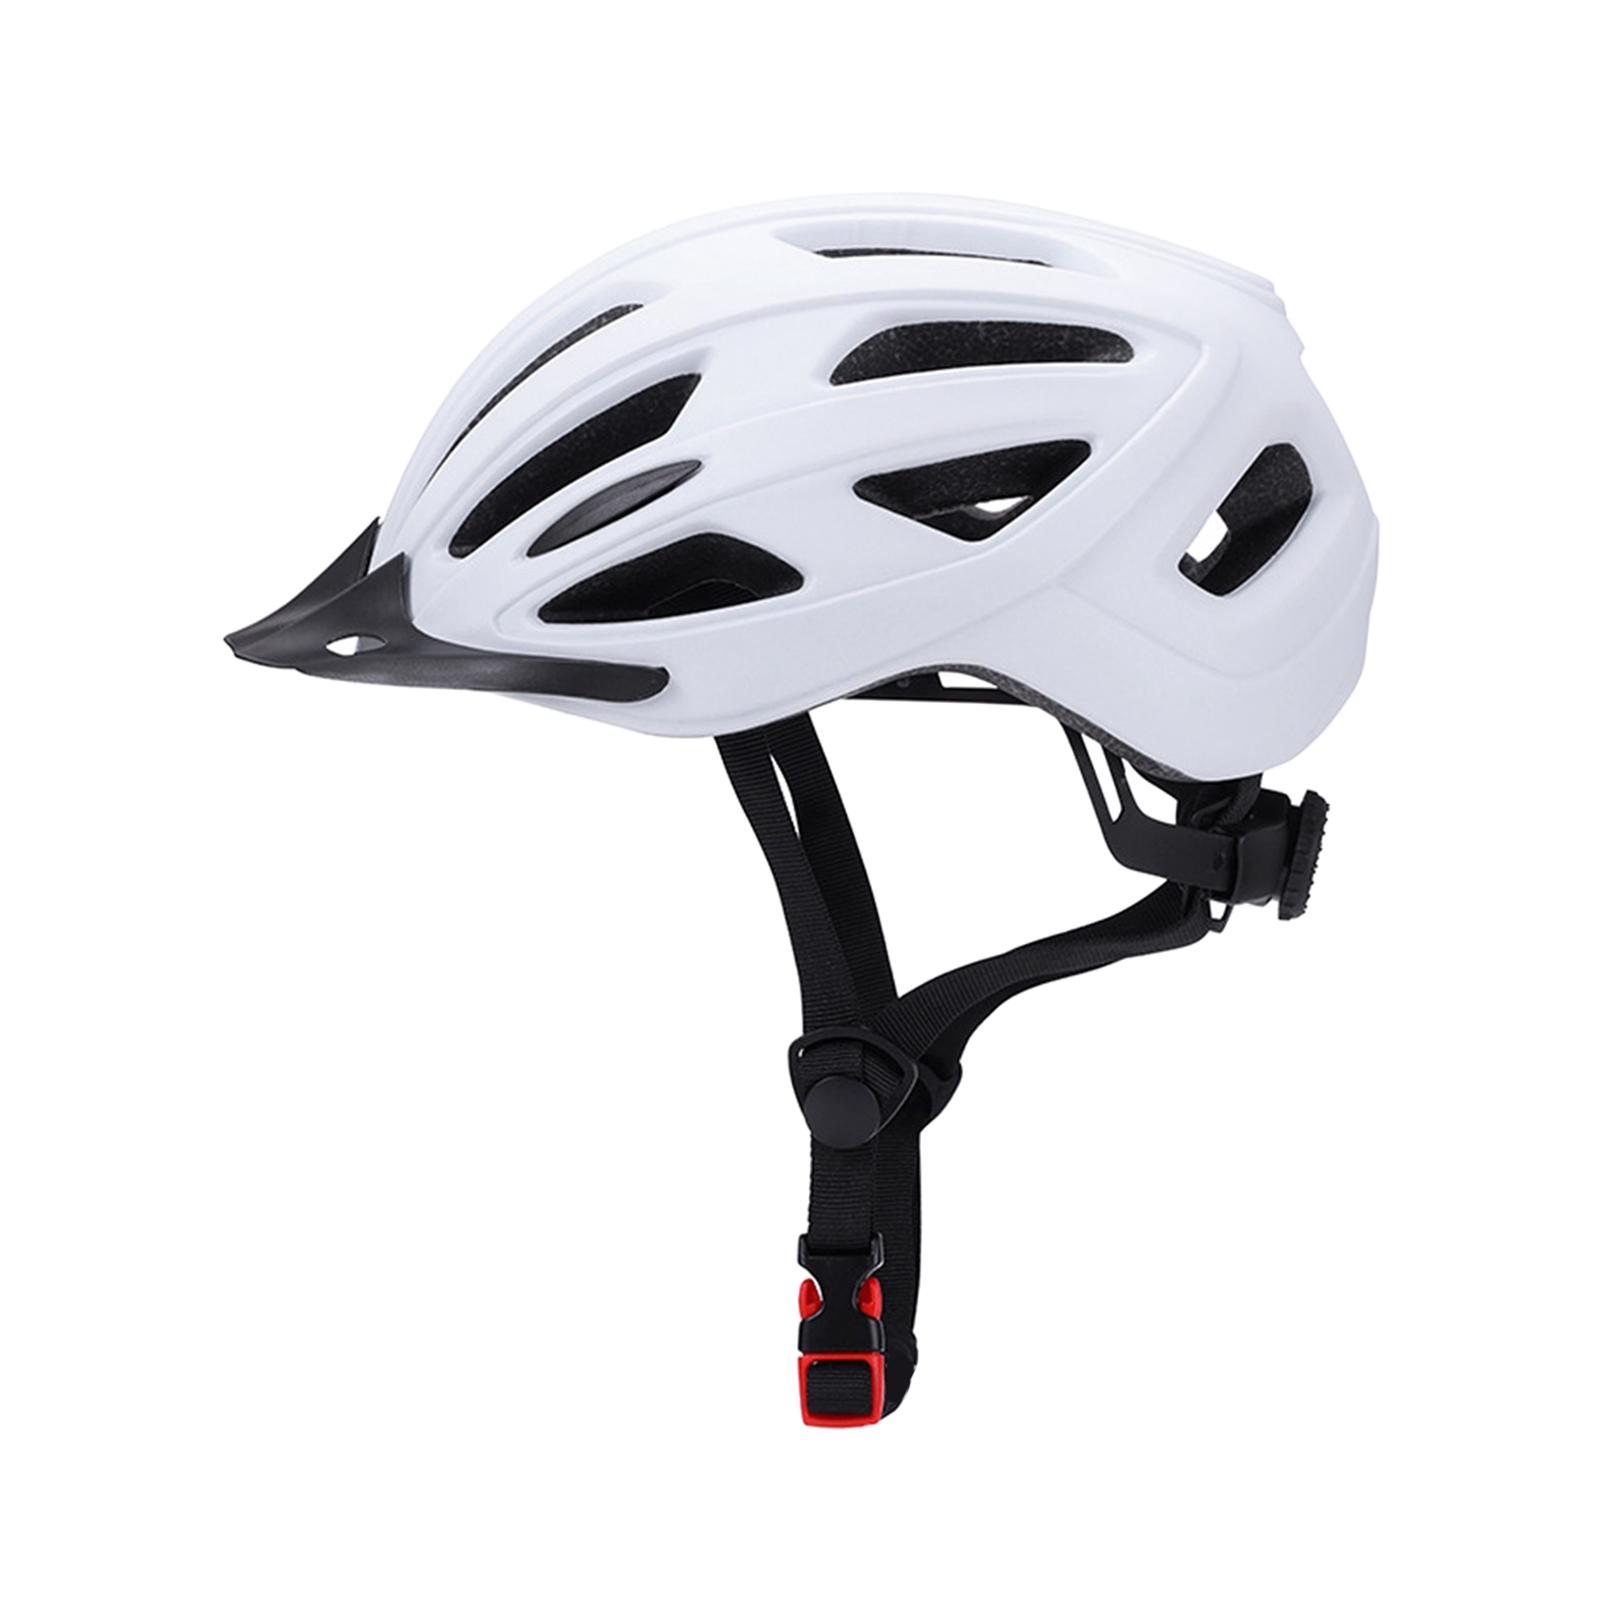 Bicycle Helmet Head Protective Lightweight with LED Safety Light Bike Helmet White